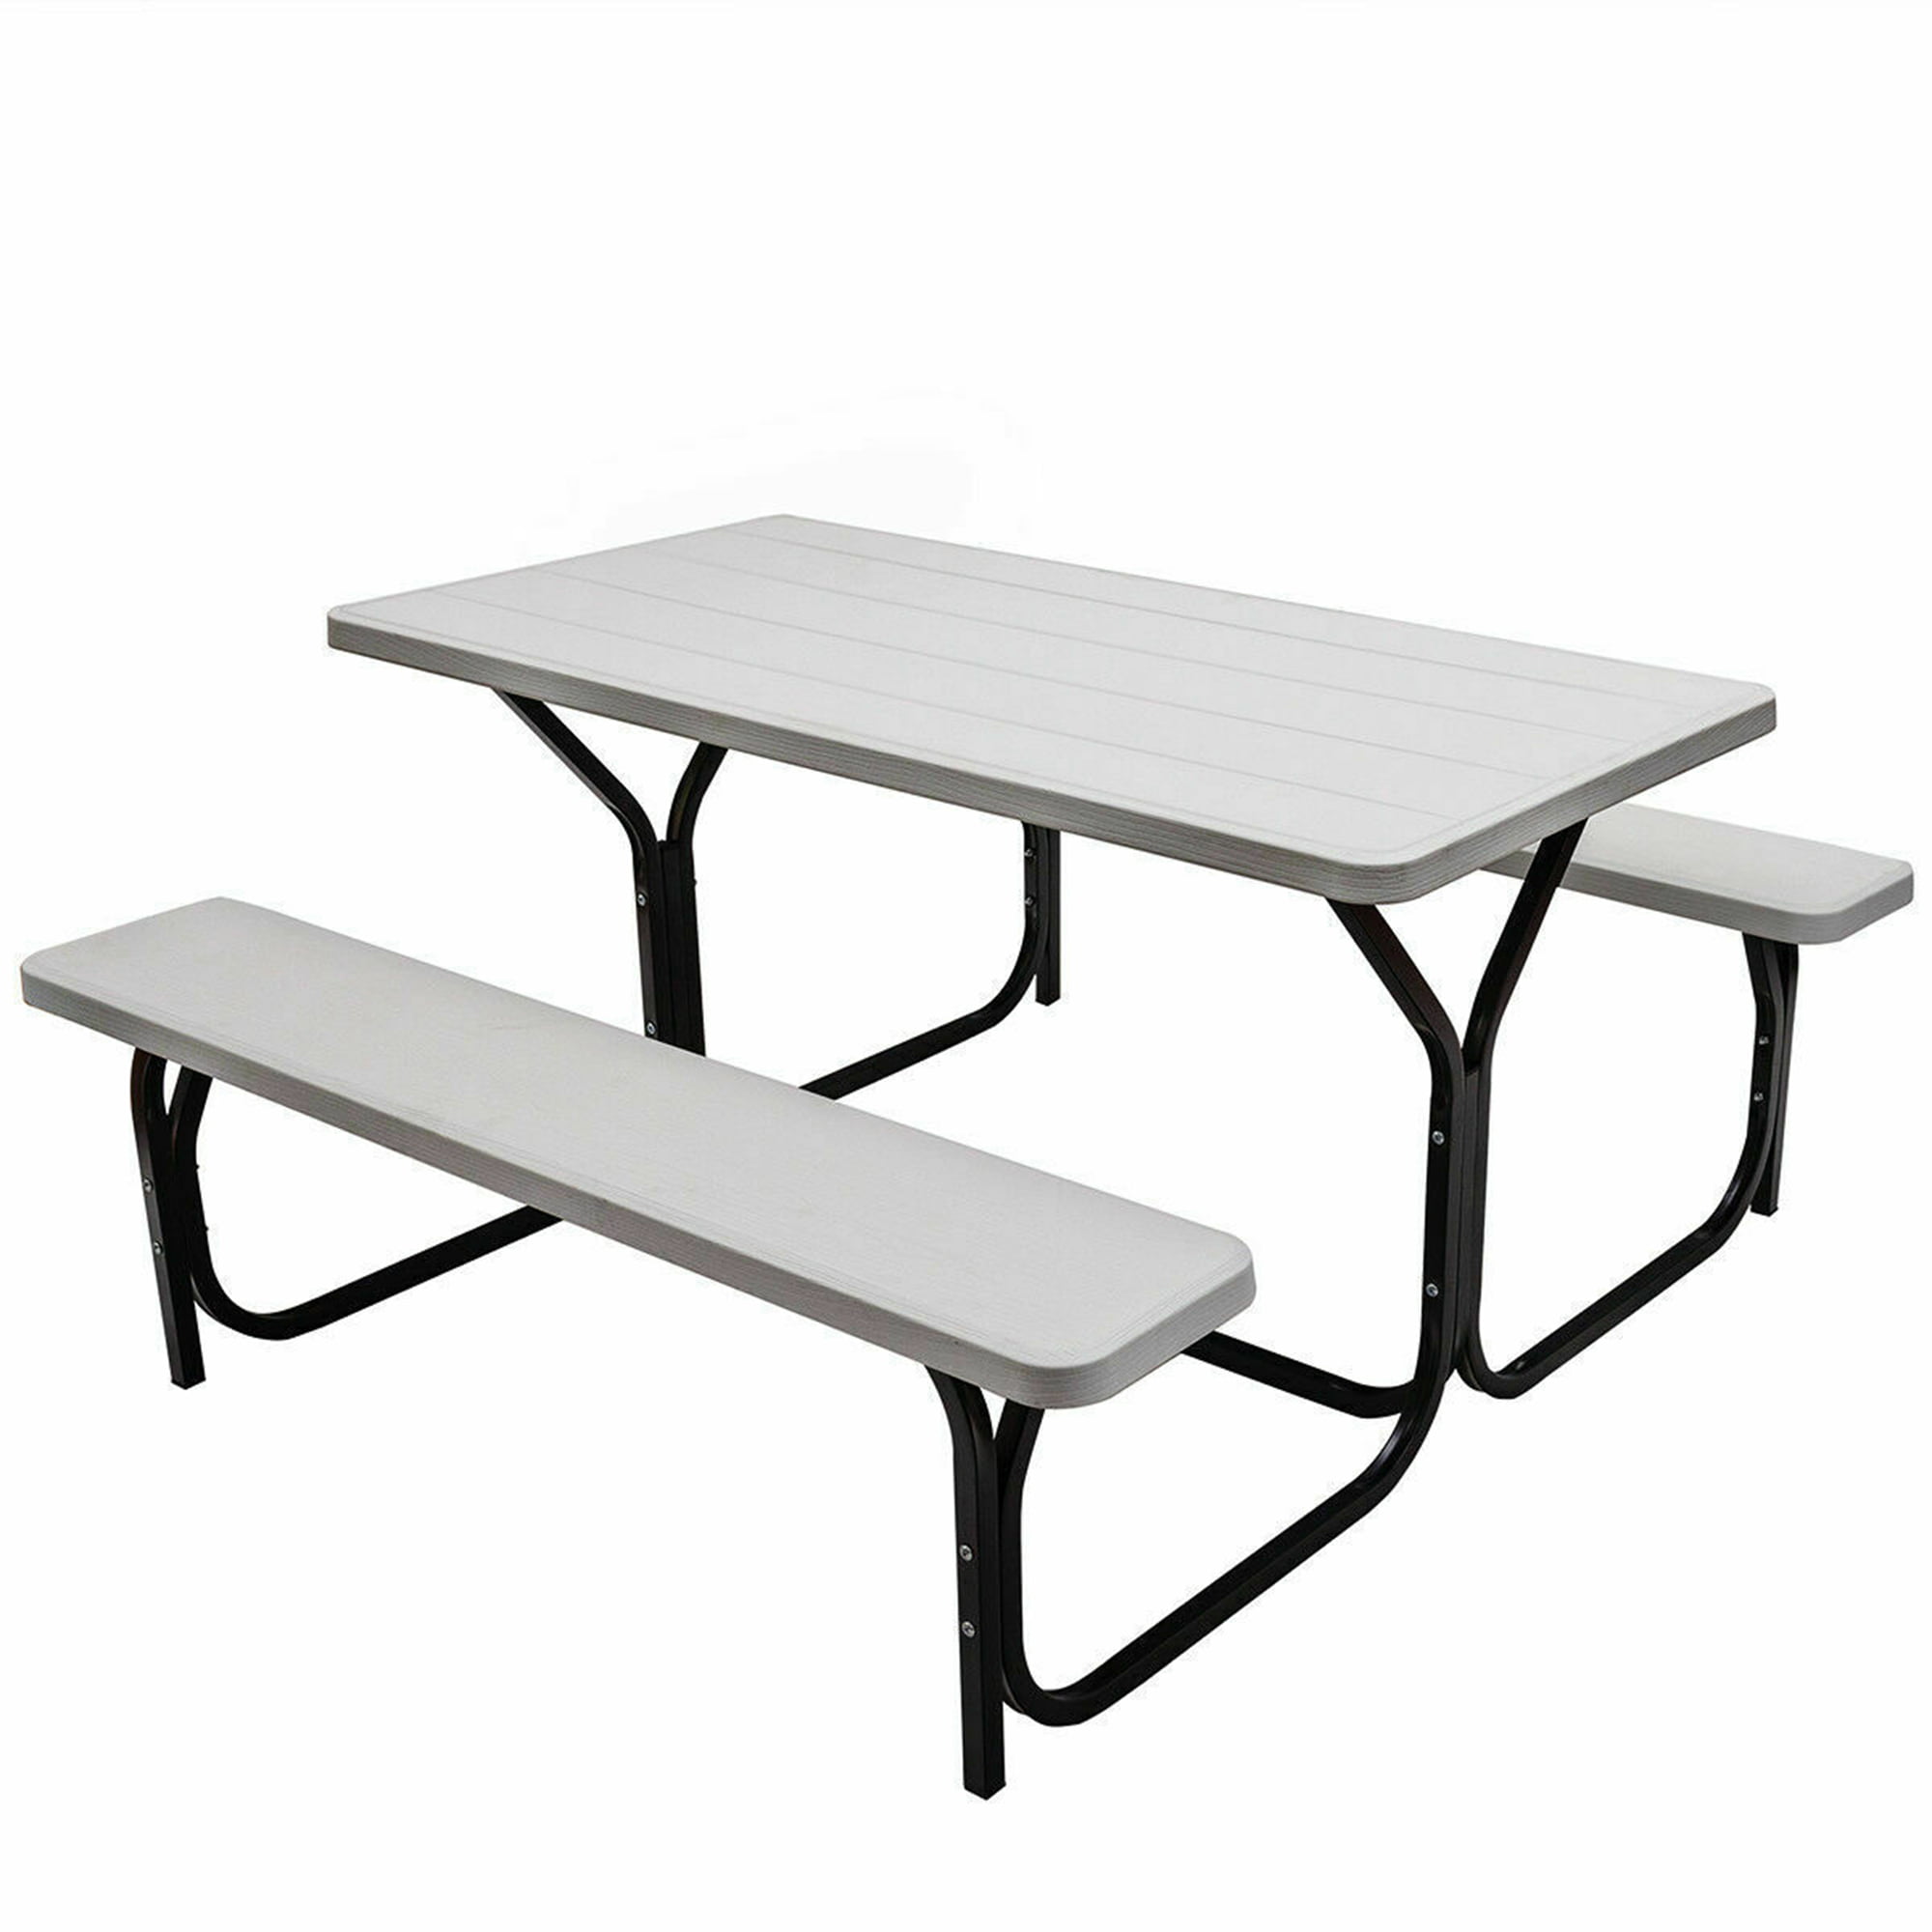 Details about   Black Rectangular Metal Outdoor Picnic Table Frame Only Wood Not Included 